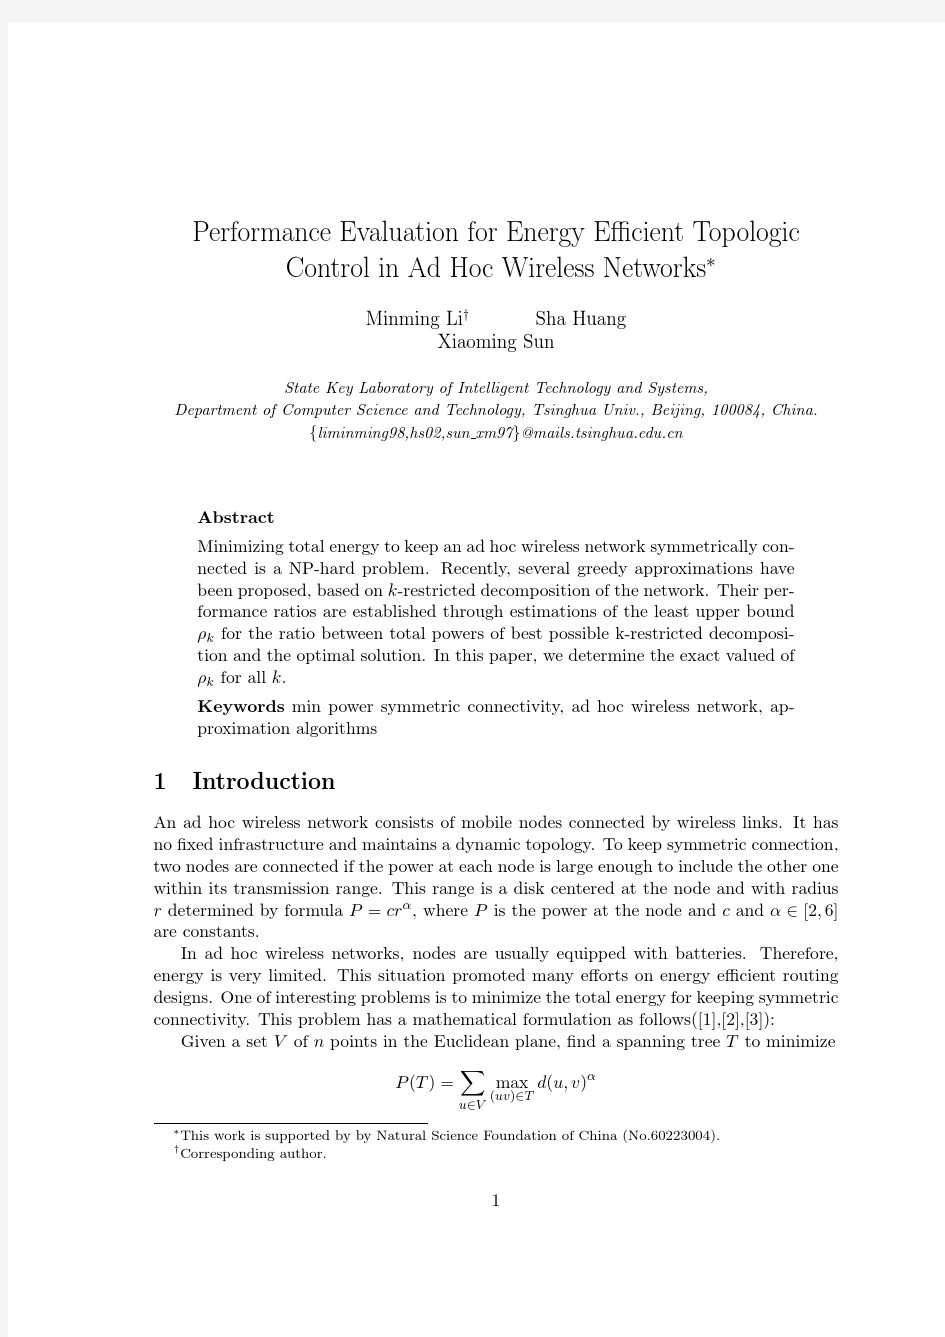 Performance Evaluation for Energy Efficient Topologic Control in Ad Hoc Wireless Networks